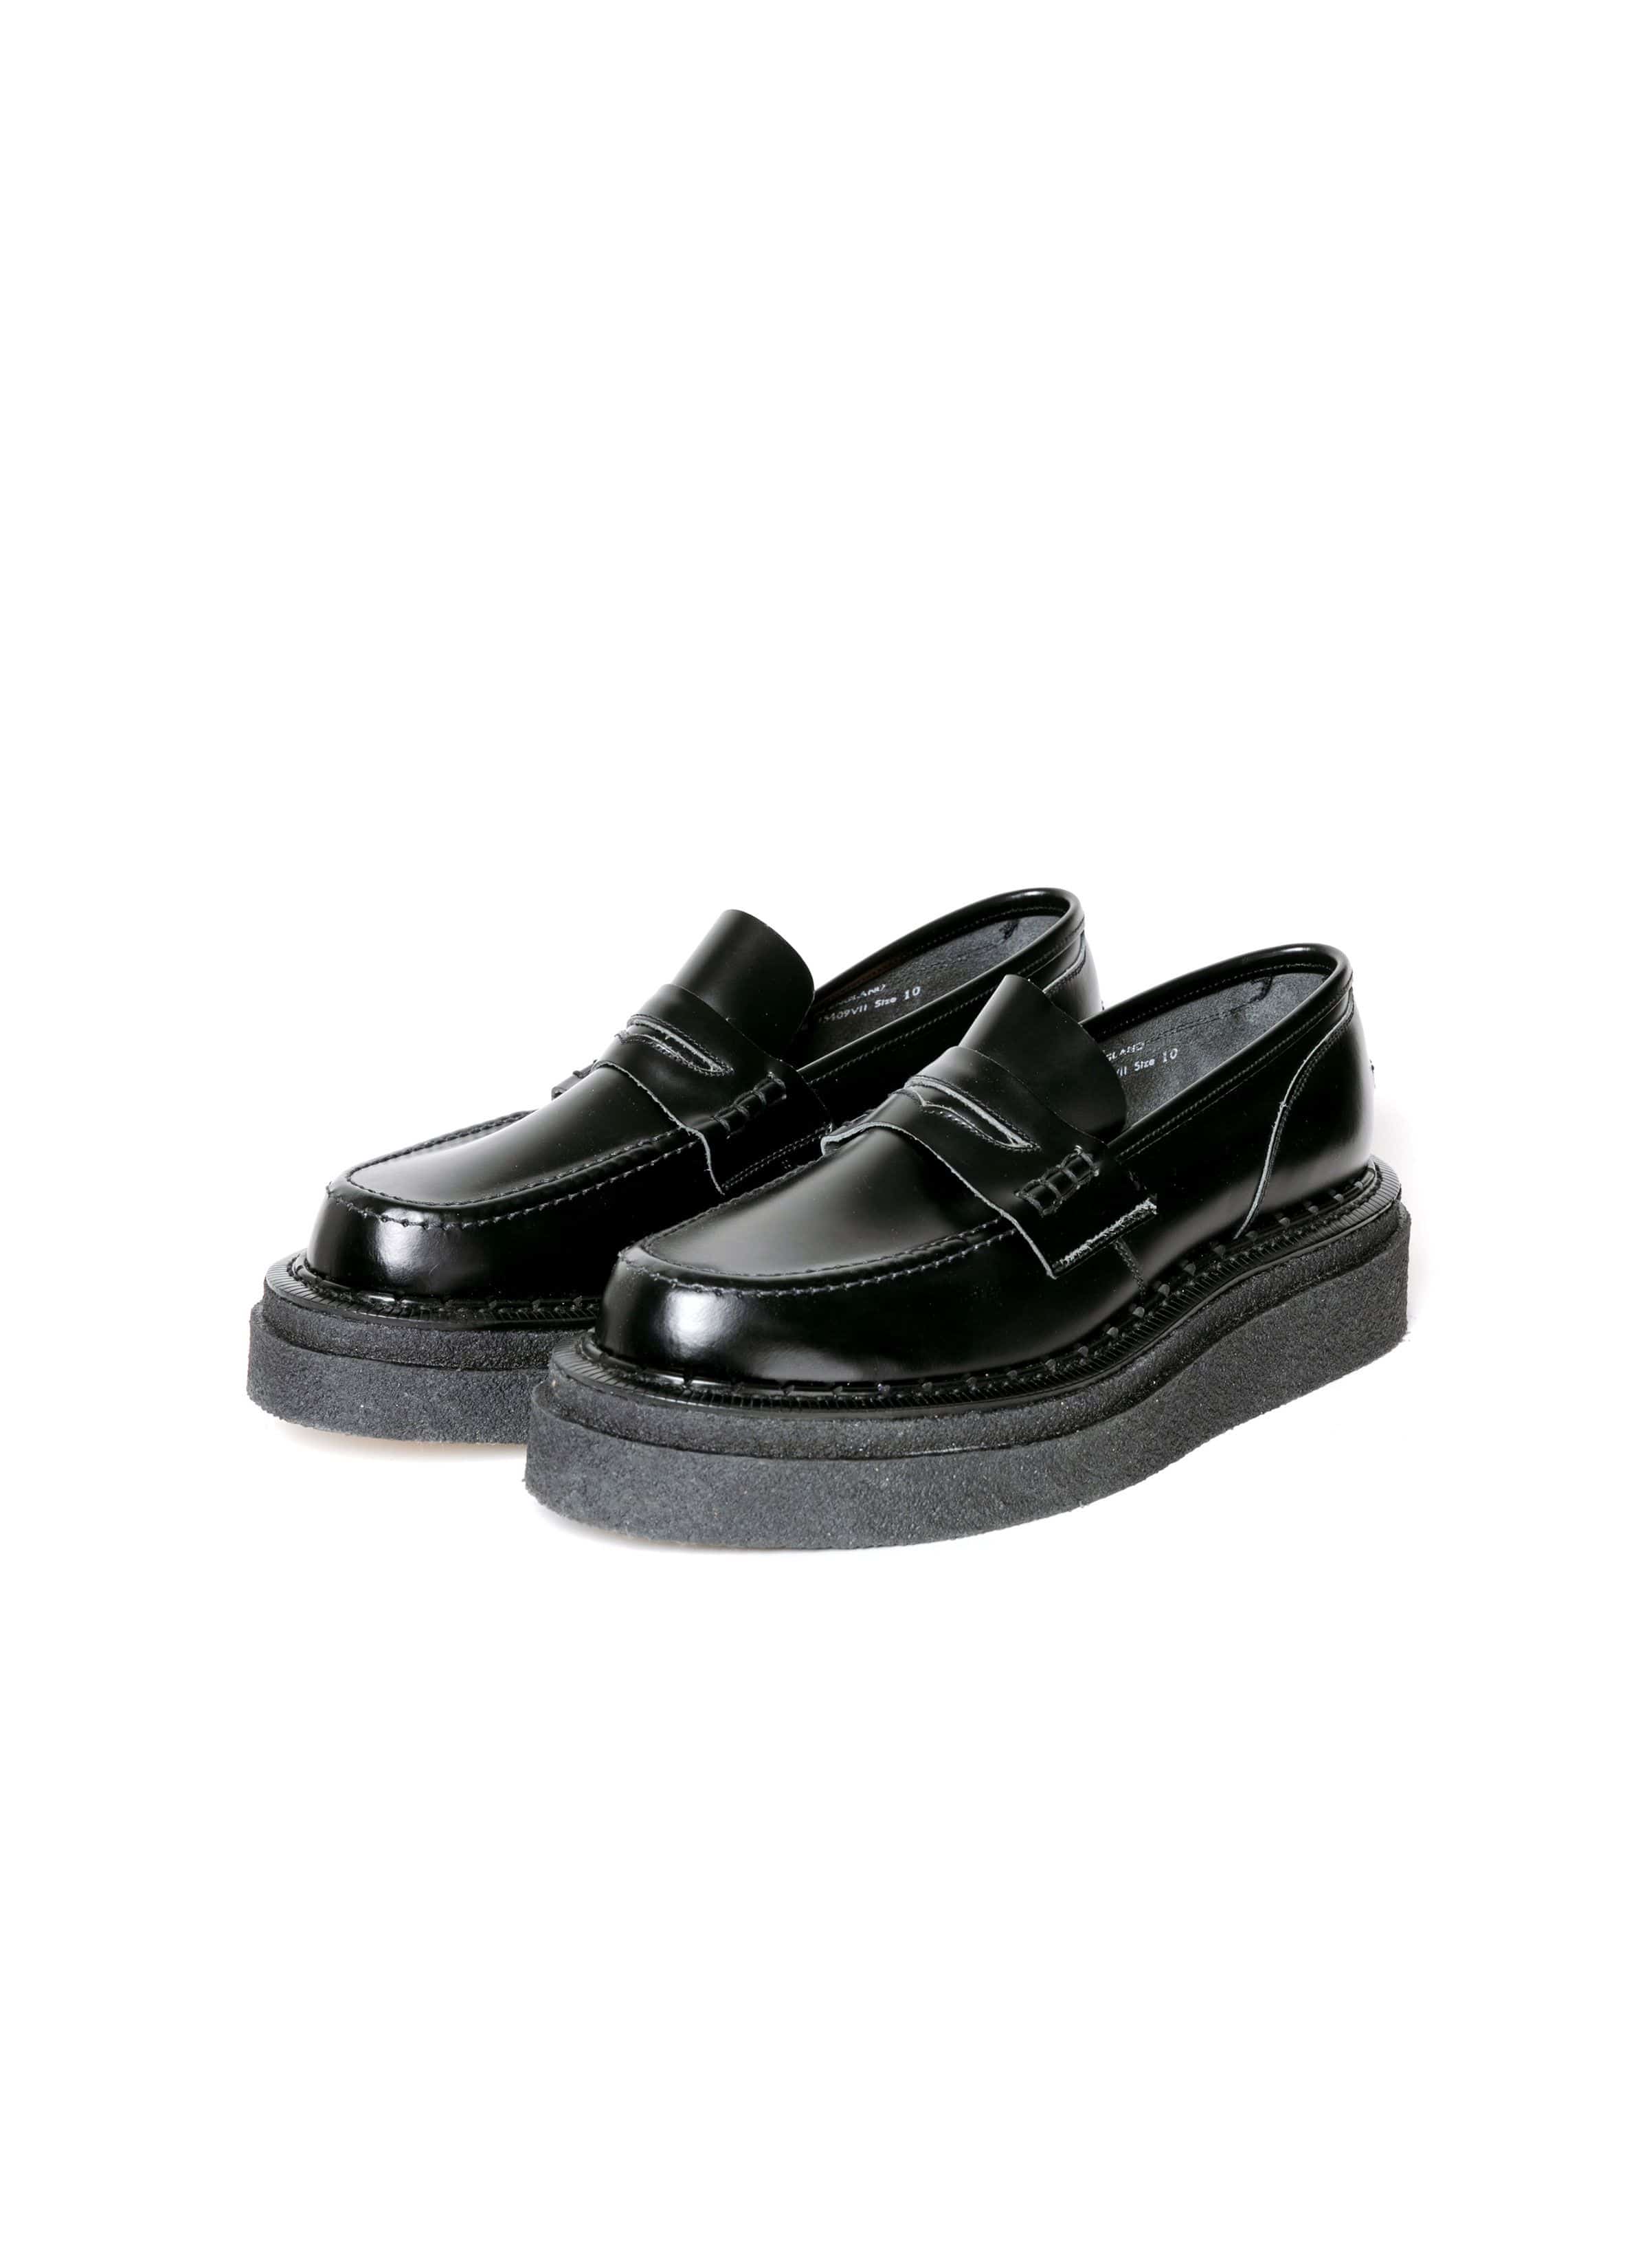 sacai x George Cox / Double Sole Coin Loafer 詳細画像 BLACK 2